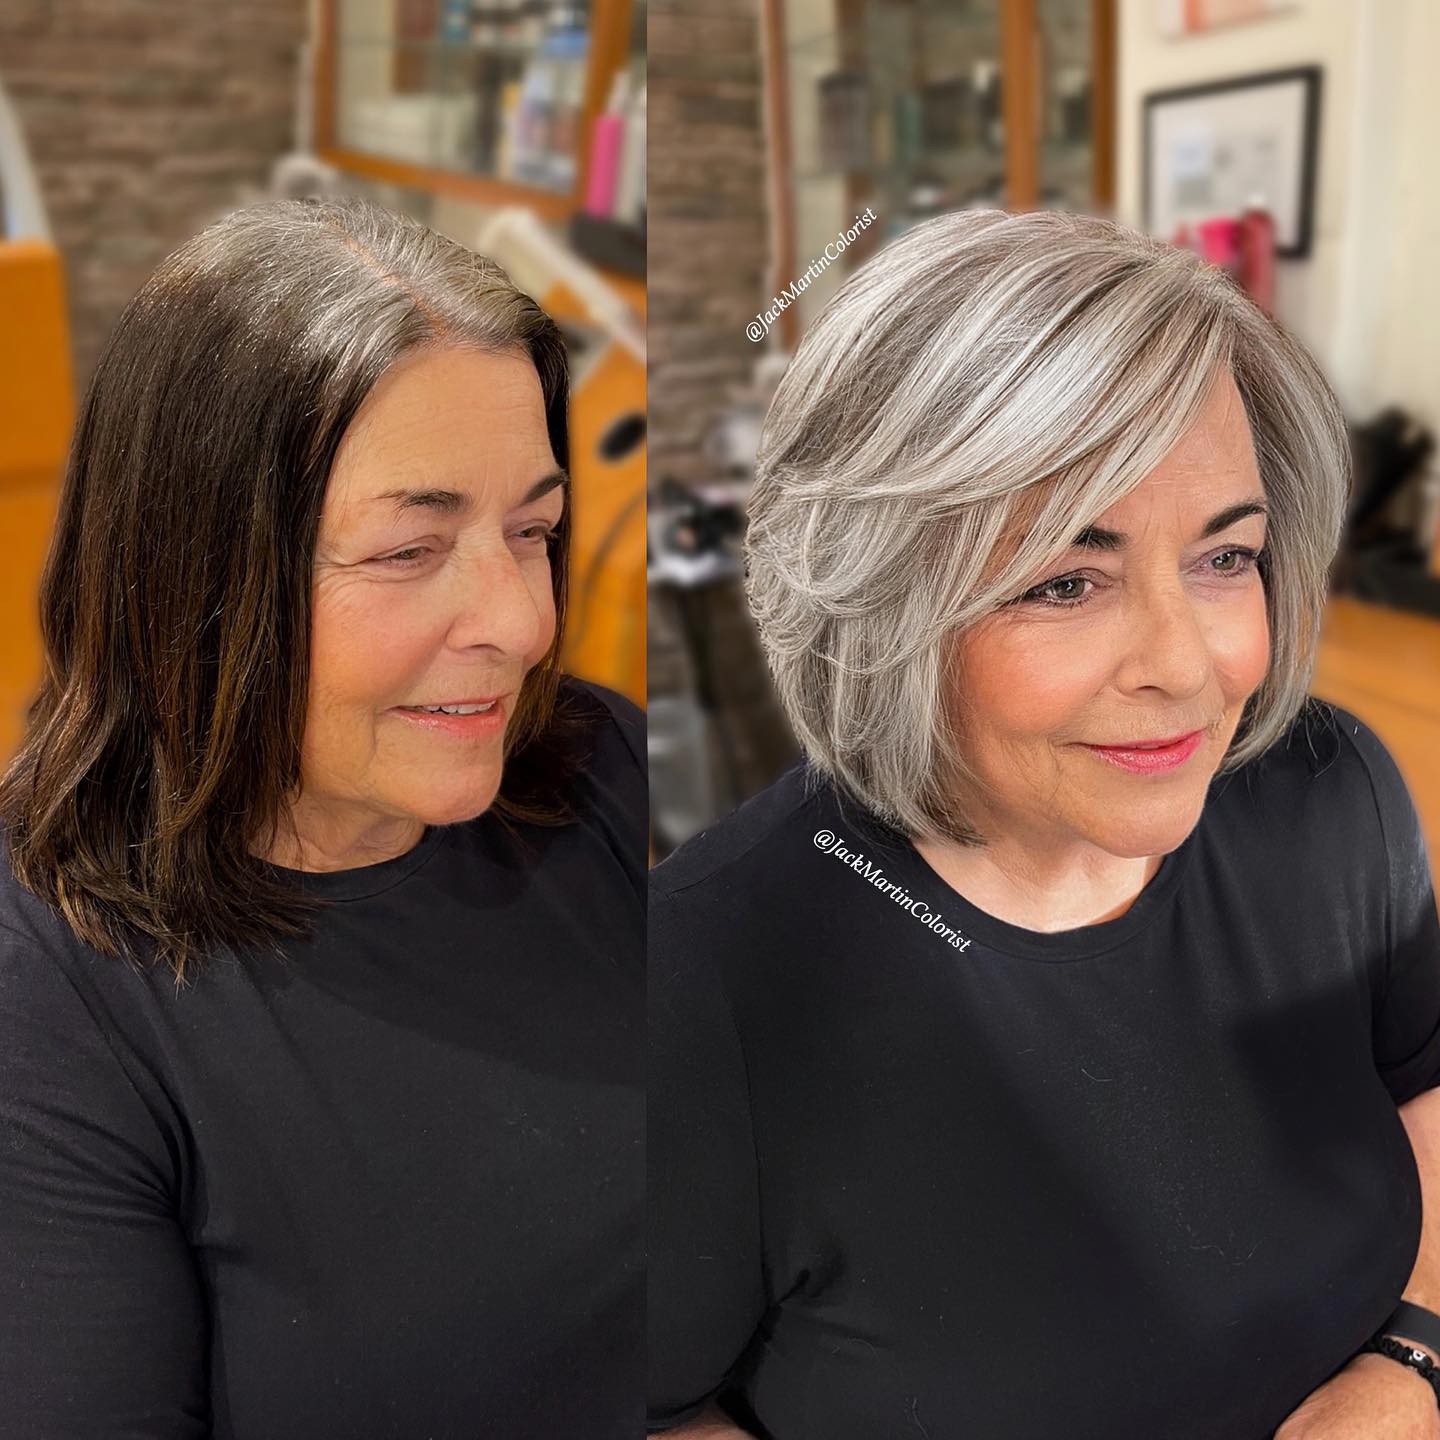 Rejuvenating haircuts for gray hair: 16 insanely beautiful ideas